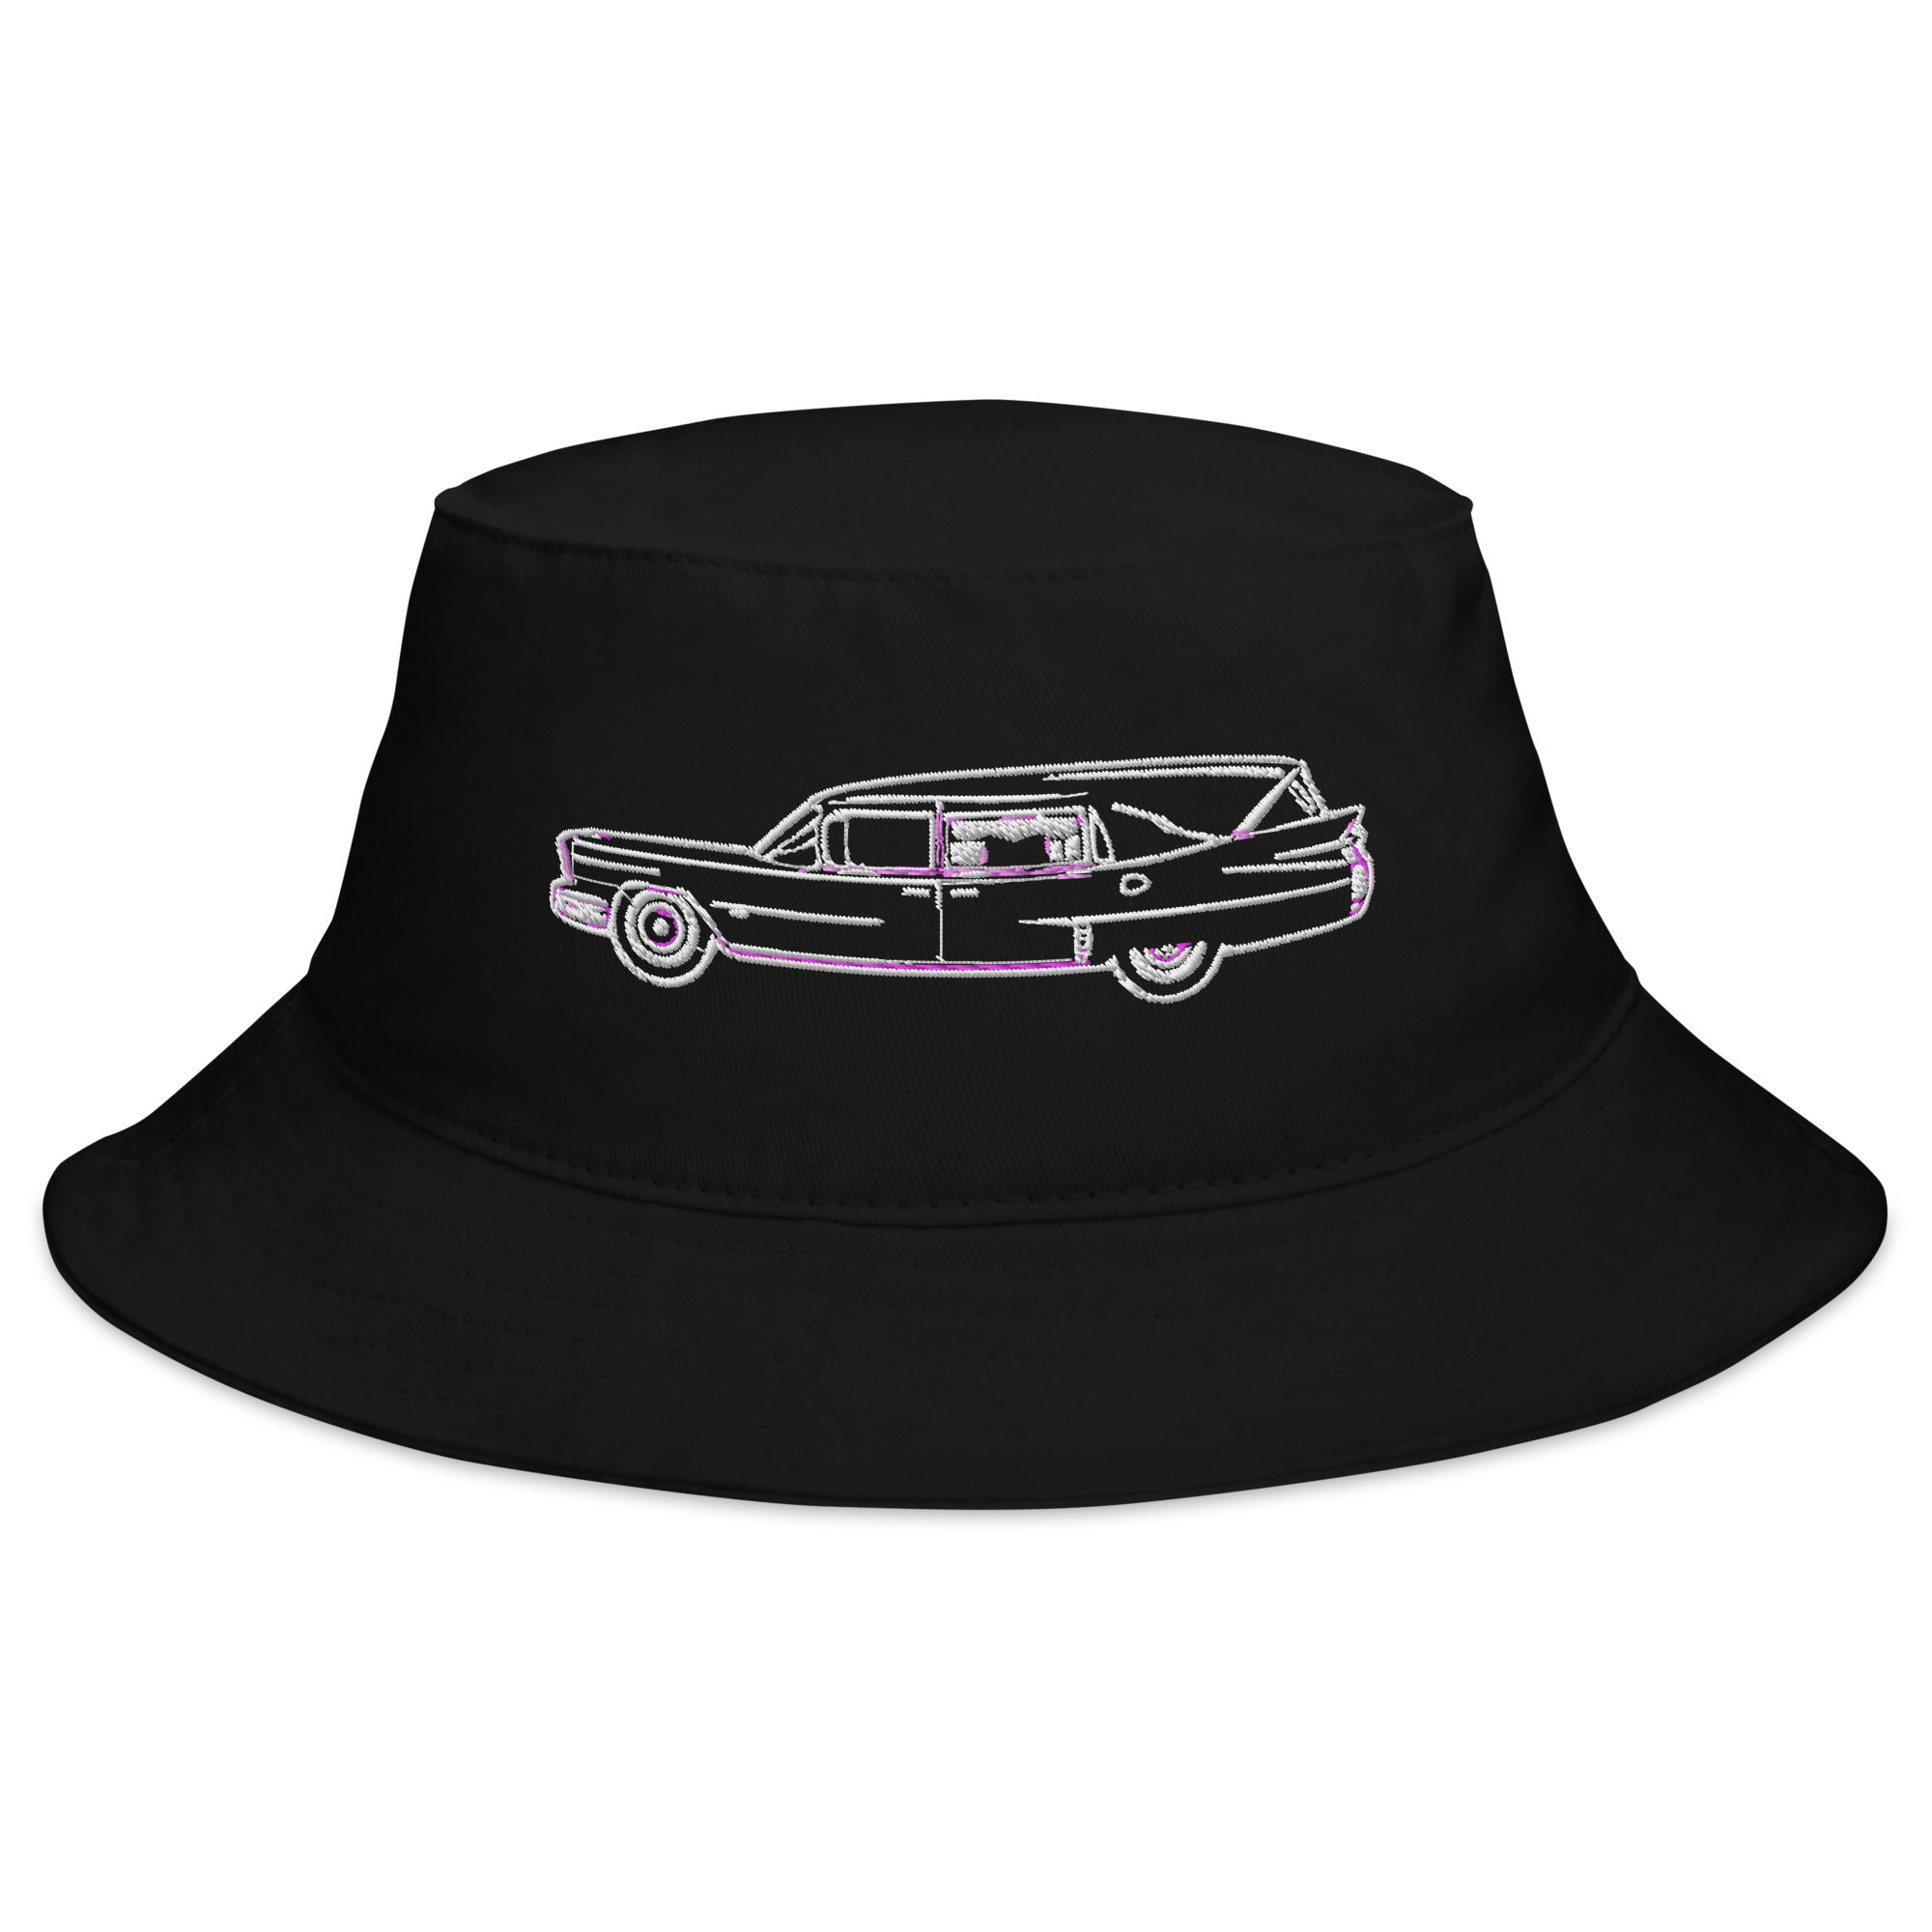 Hearse Funeral Car Embroidered Bucket Hat Casket Coach